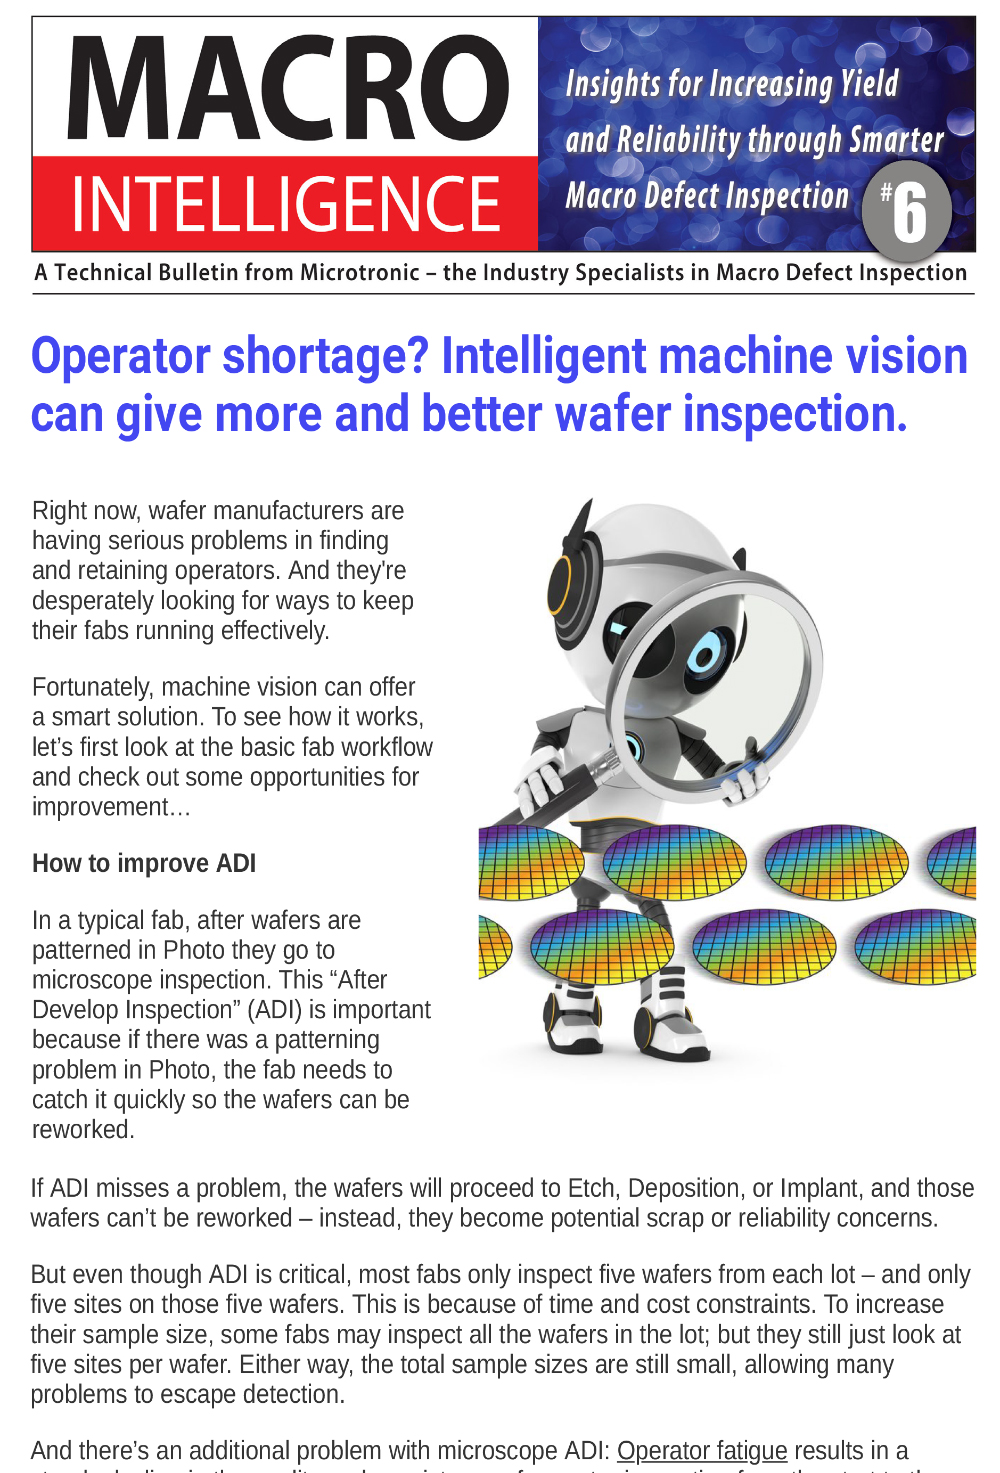 Operator shortage? Intelligent machine vision can give more and better wafer inspection.